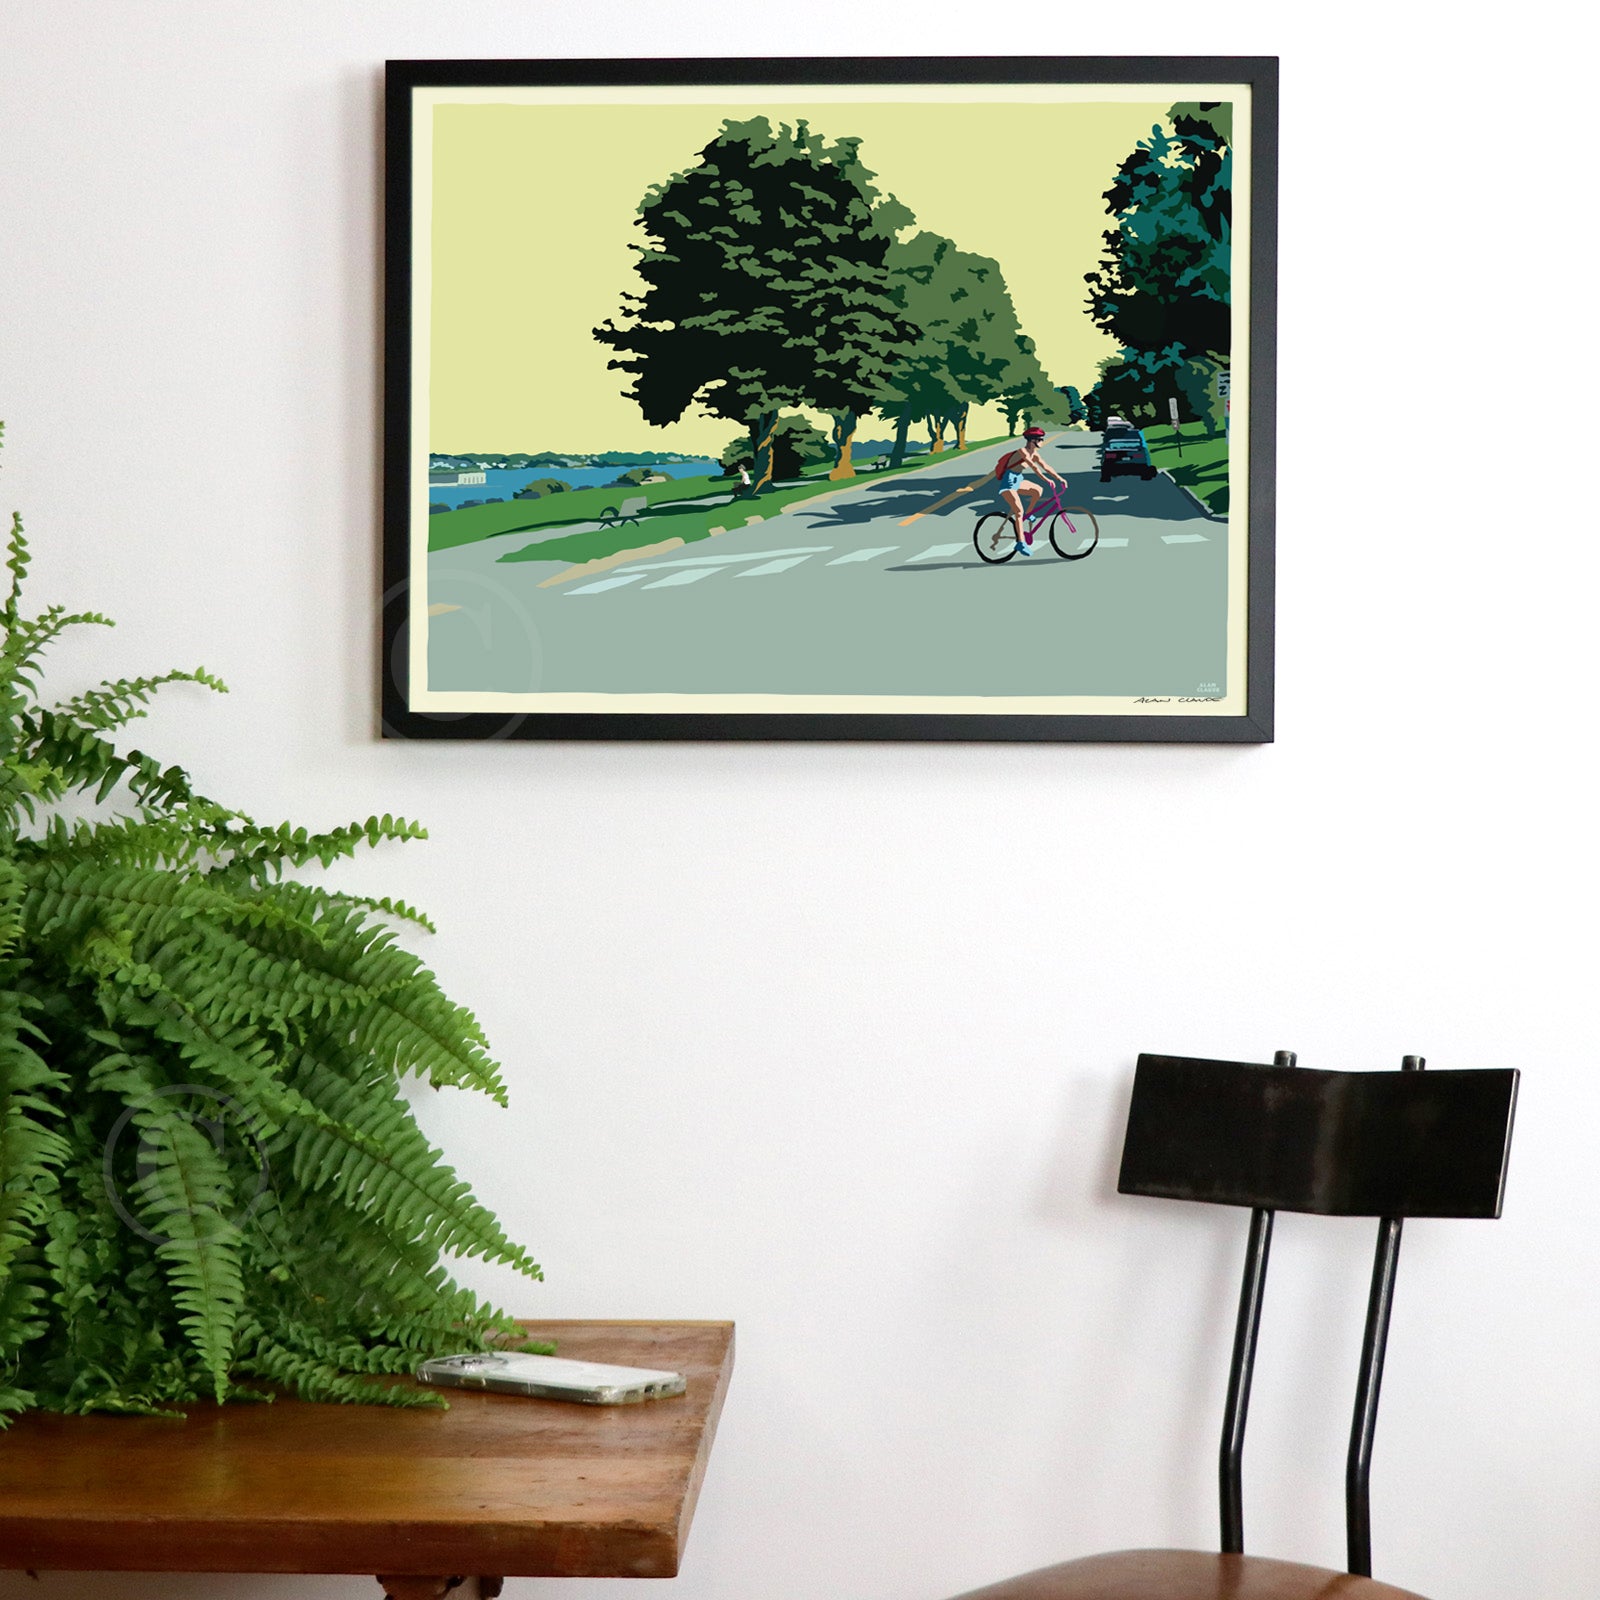 Eastern Promenade Afternoon Art Print 18" x 24" Framed Wall Poster By Alan Claude - Maine